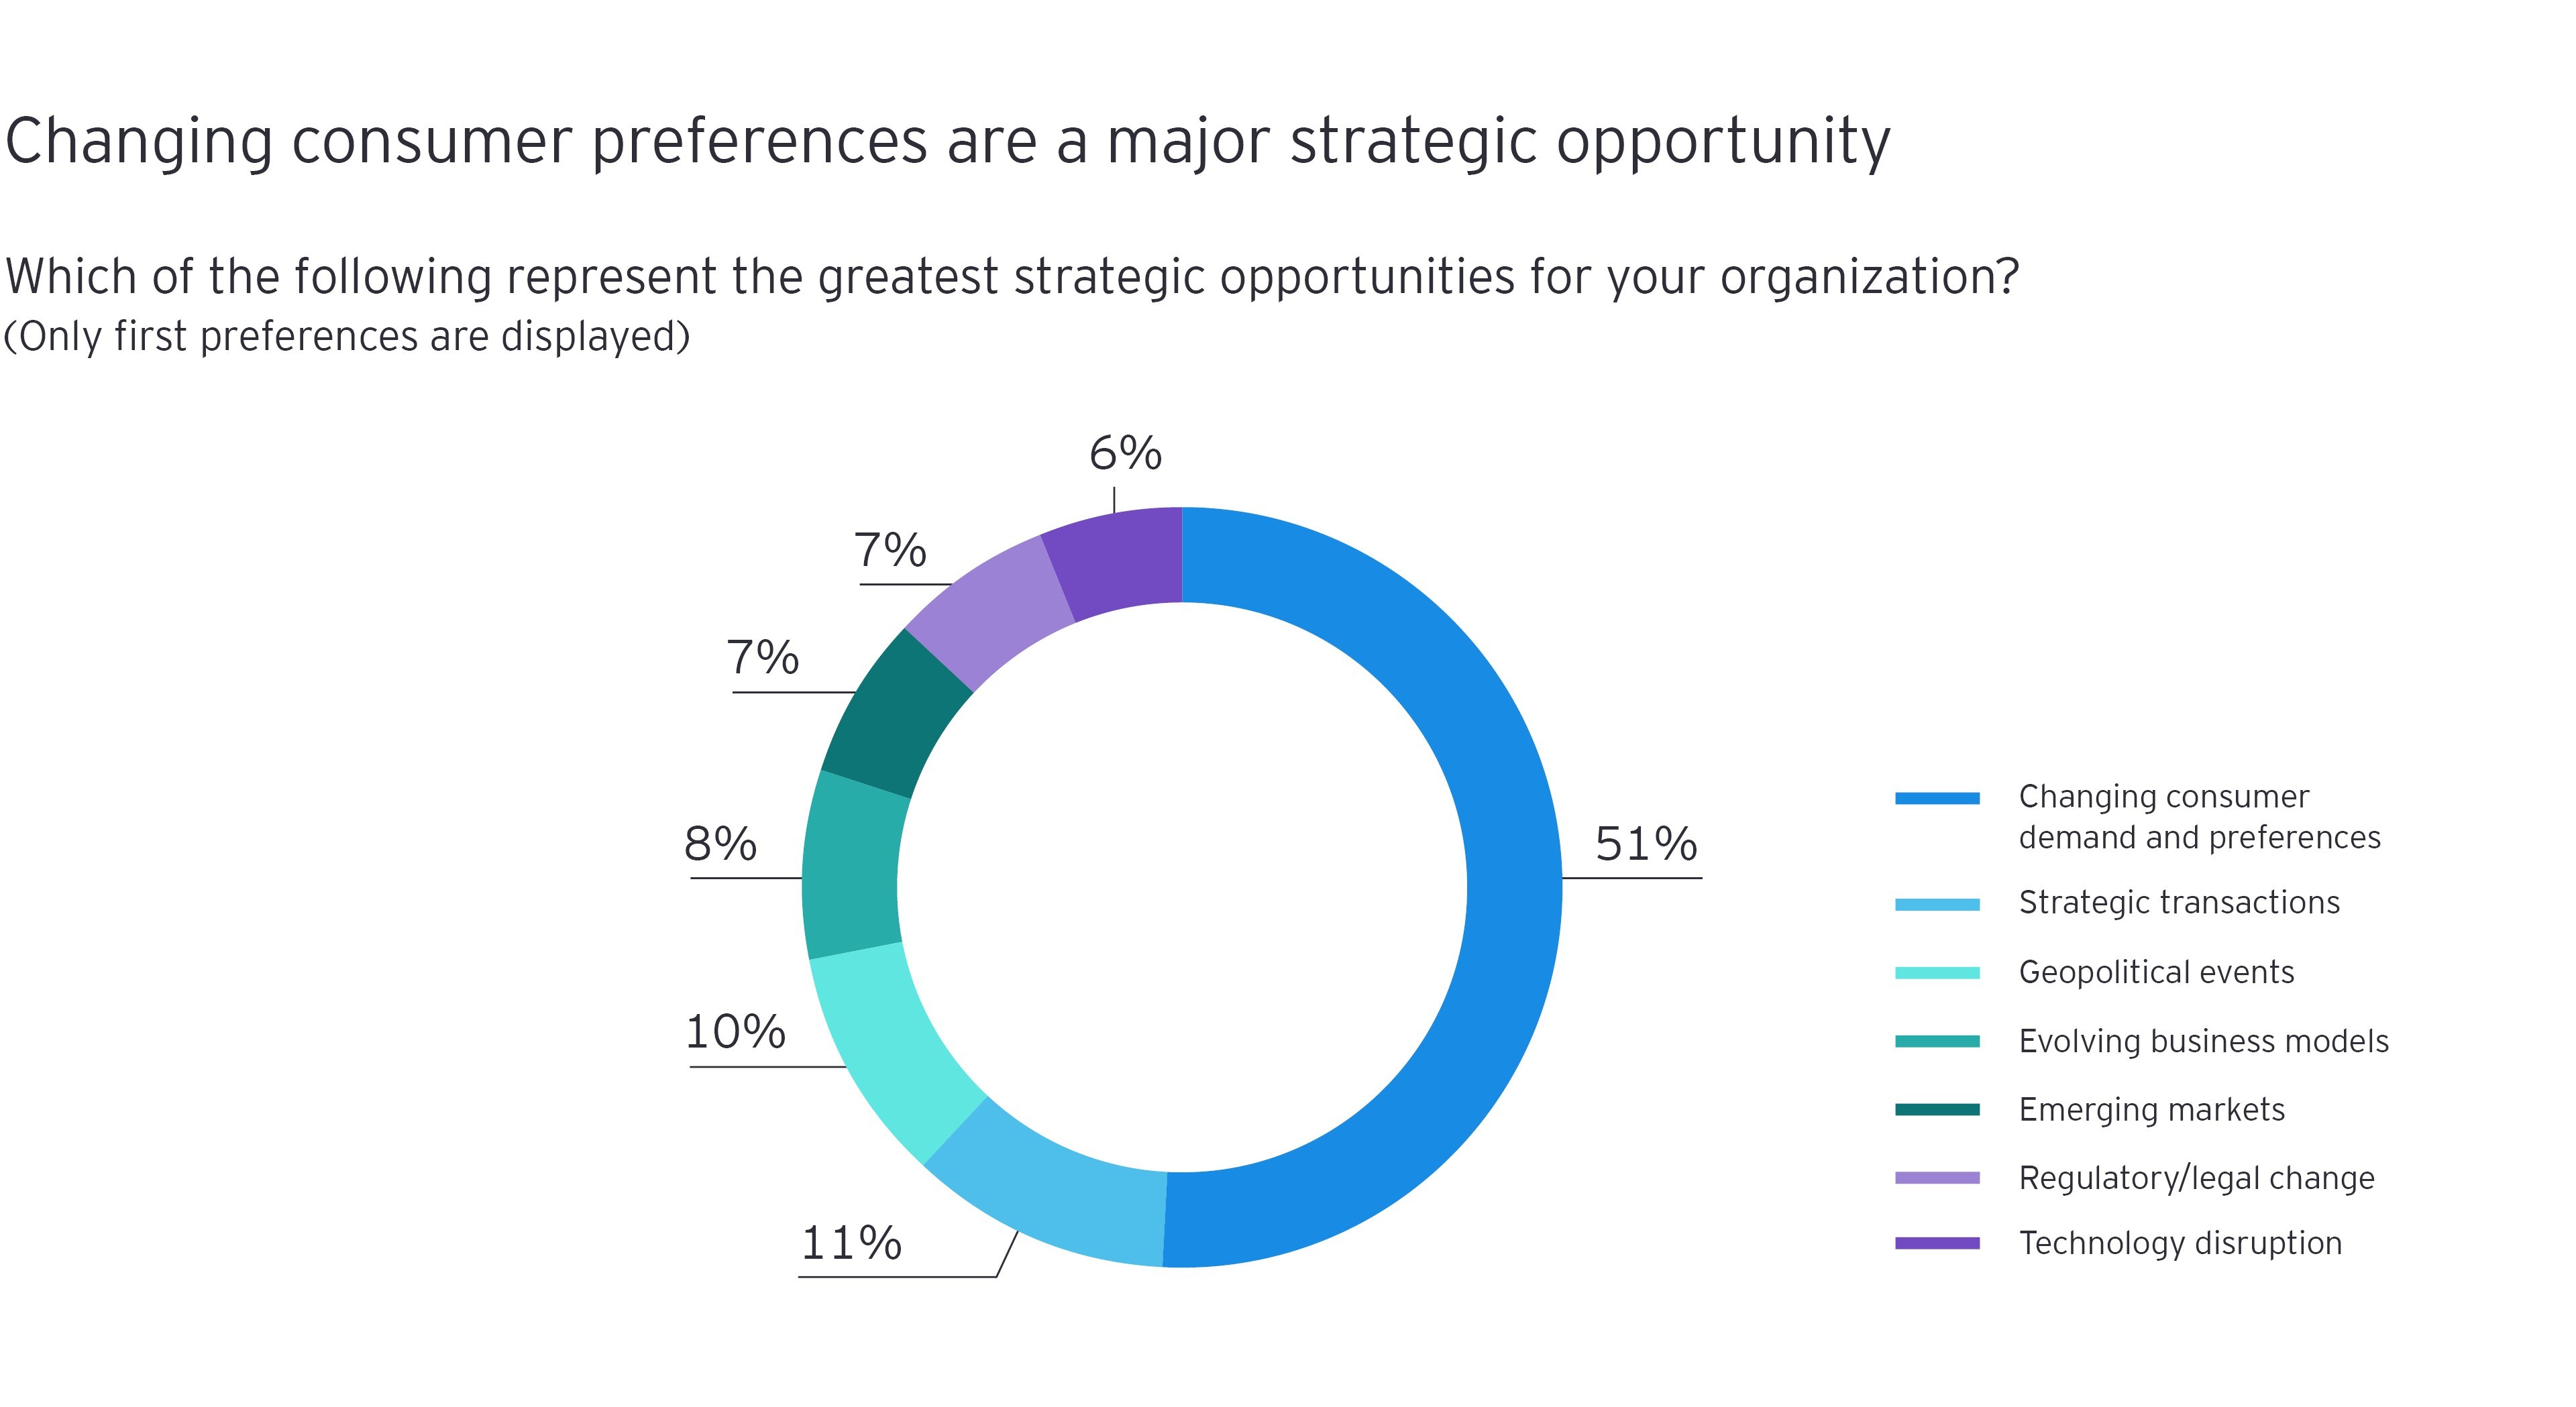 Chart breaking down overall survey responses by percentage to “Which of the following represent the greatest strategic opportunities for your organization?”